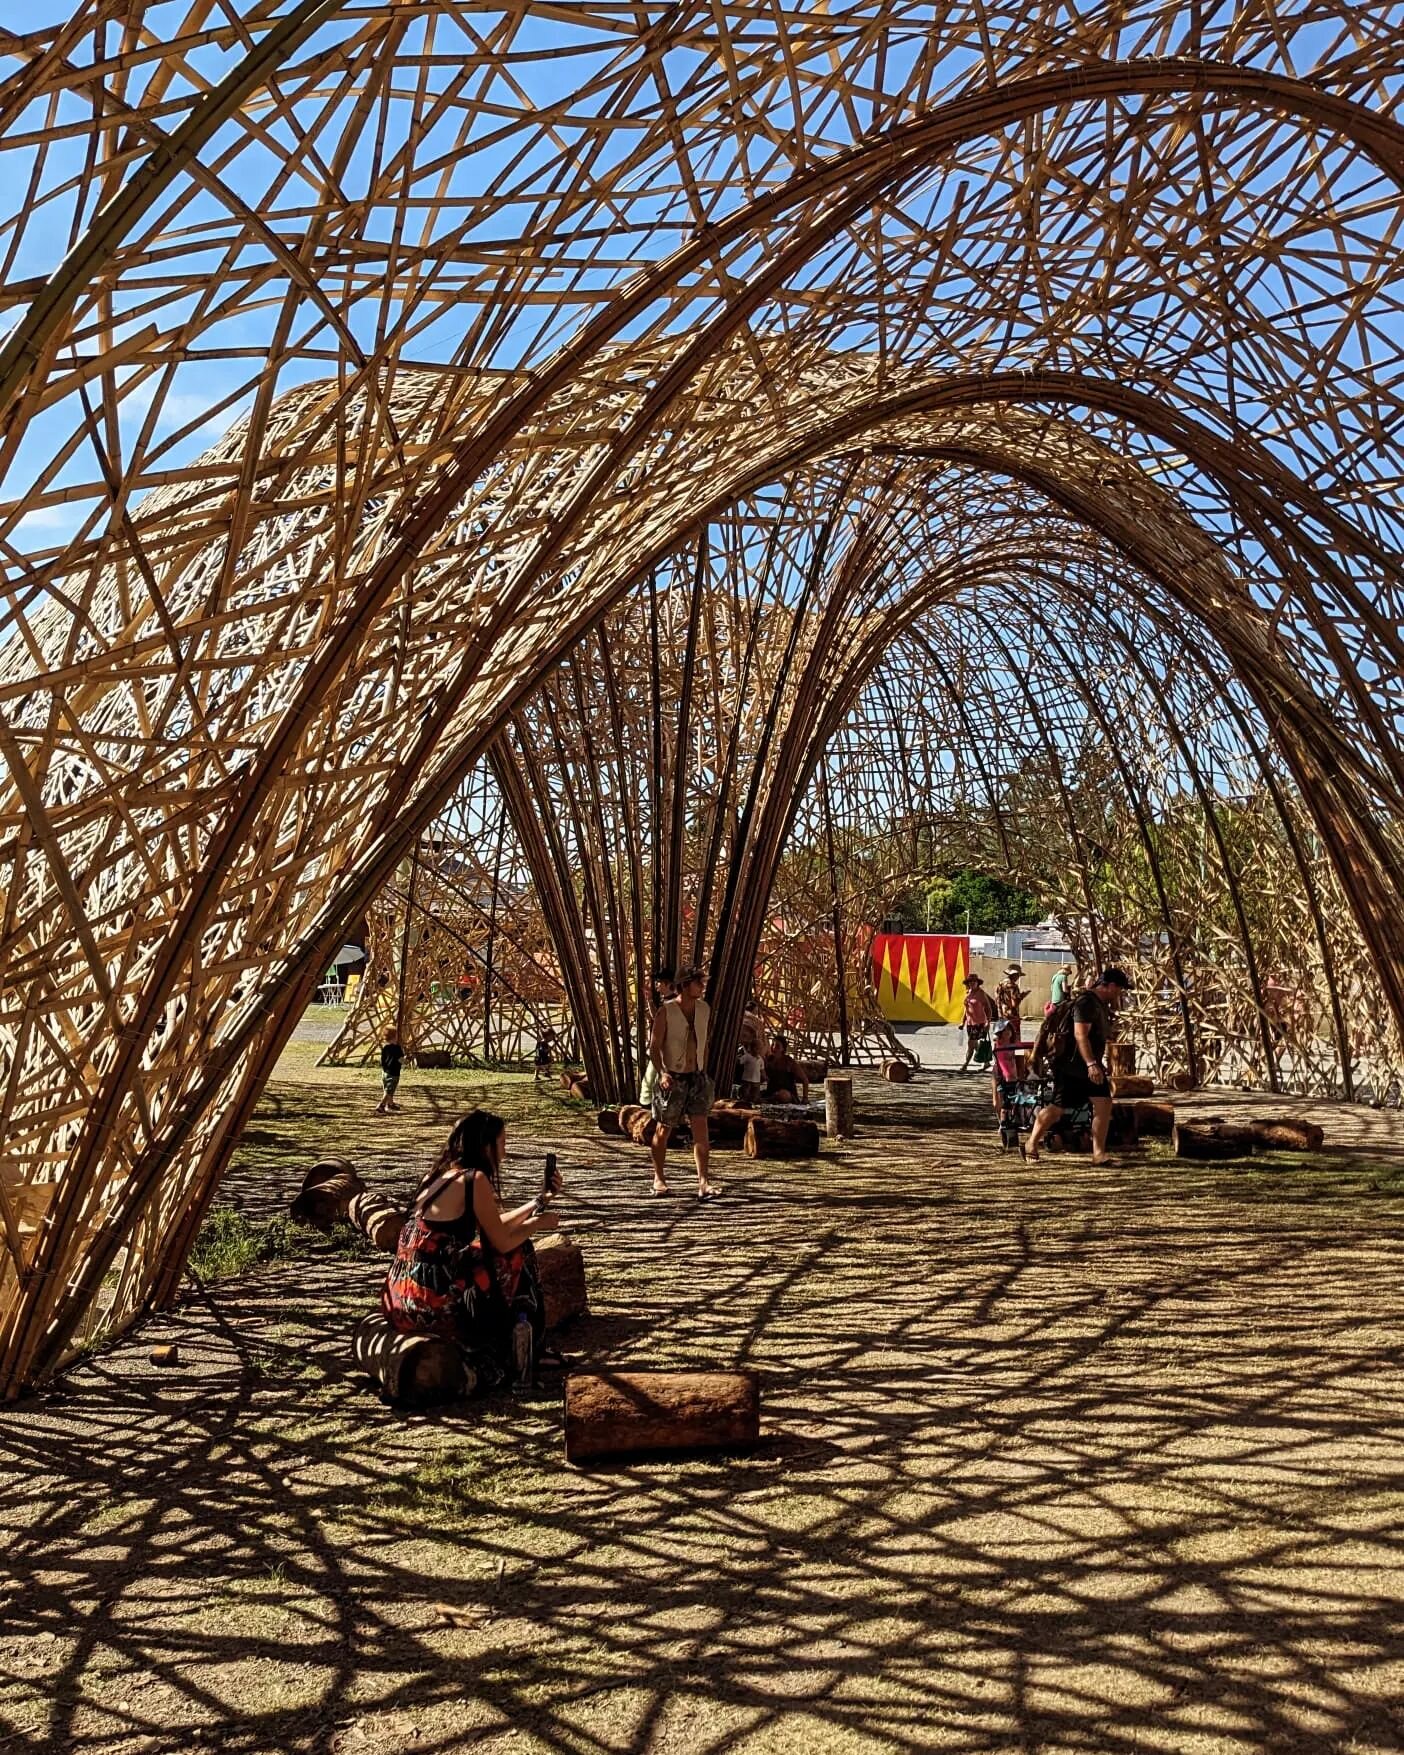 Escaping the heat in our pavilion at @woodfordfolkfestival 

#caveurban #woodfordfolkfestival #bamboo

Thanks always to our incredible build crew @woodfordfolkfestivalvolunteers led by @juanpablopintomeza and @nicnicpicnic